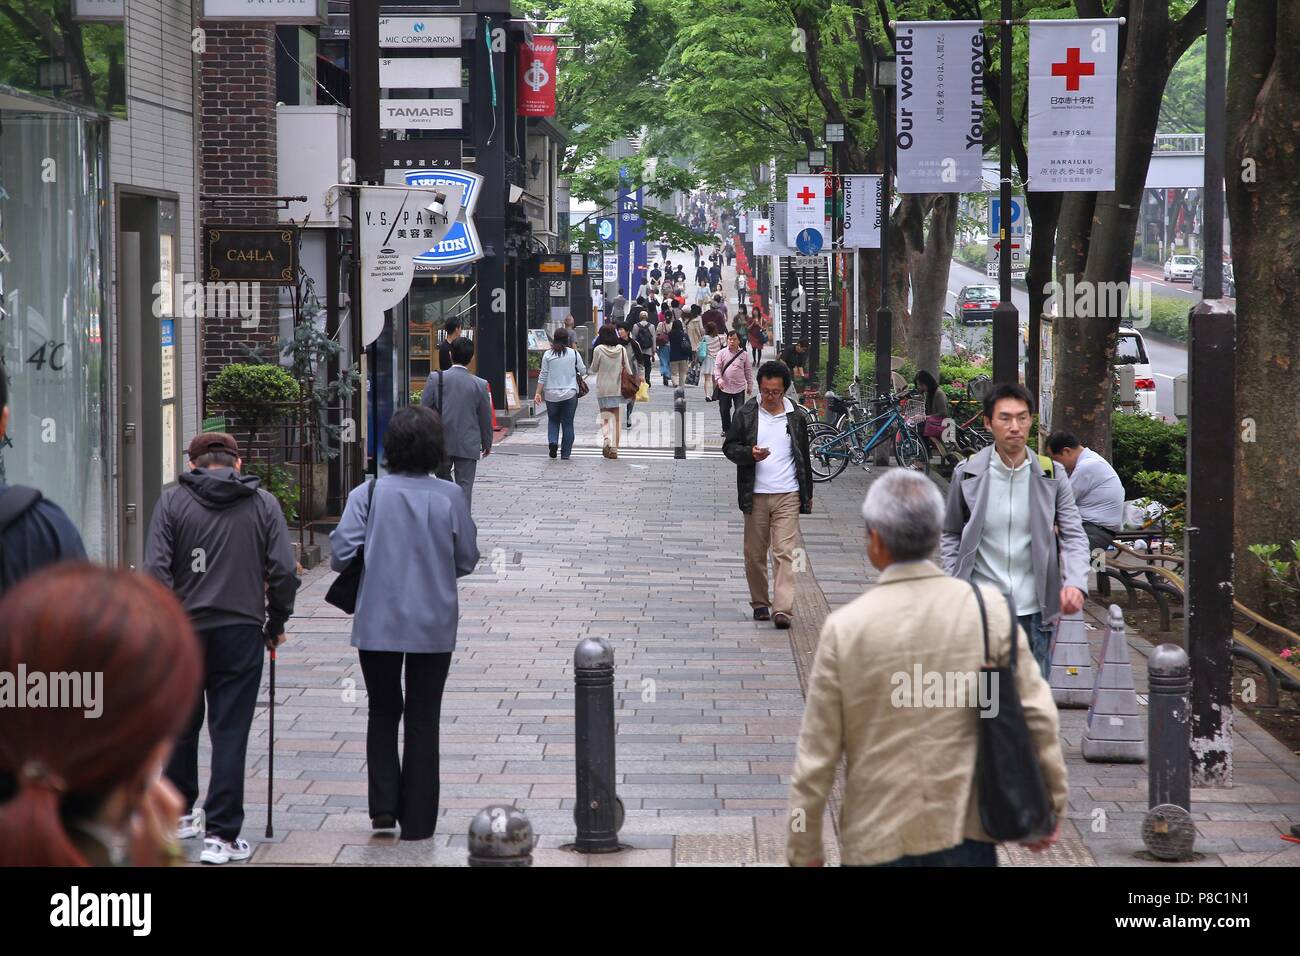 TOKYO, JAPAN - MAY 9, 2012: People shop in Omotesando district in Tokyo. Omotesando is considered one of most important shopping areas in Tokyo, the l Stock Photo